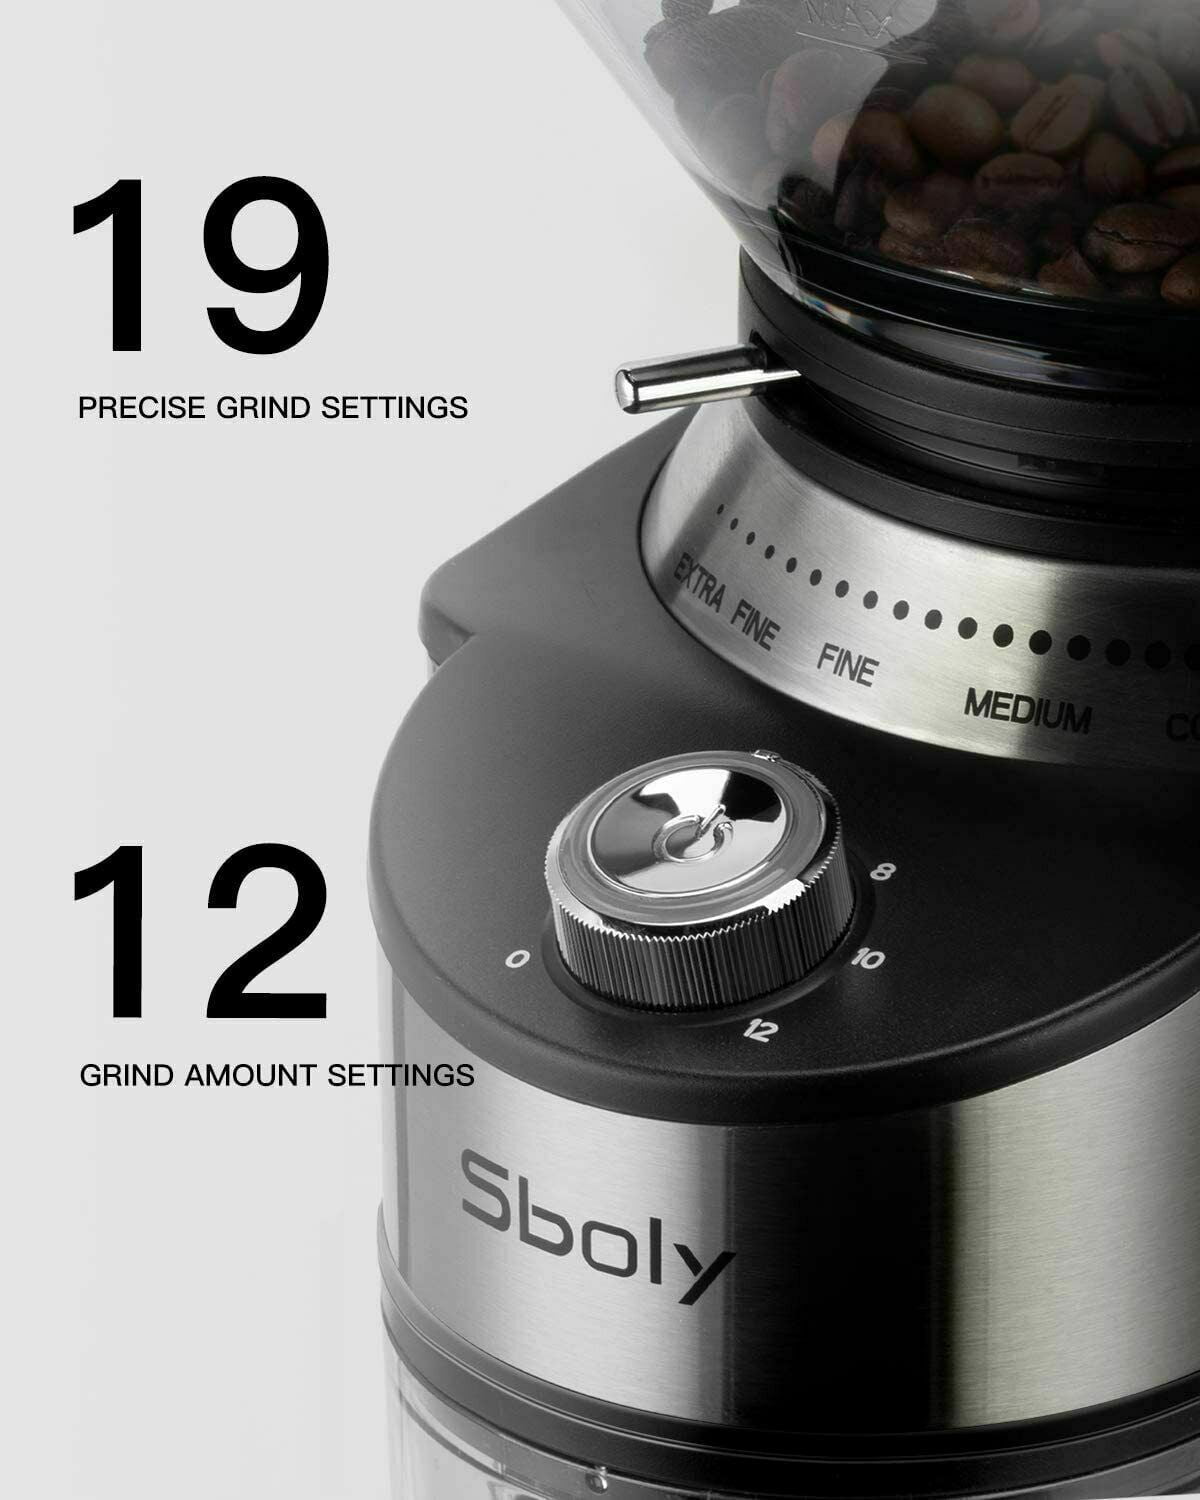 sboly automatic conical burr coffee grinder ( Barely Used ) ( Cleaned )